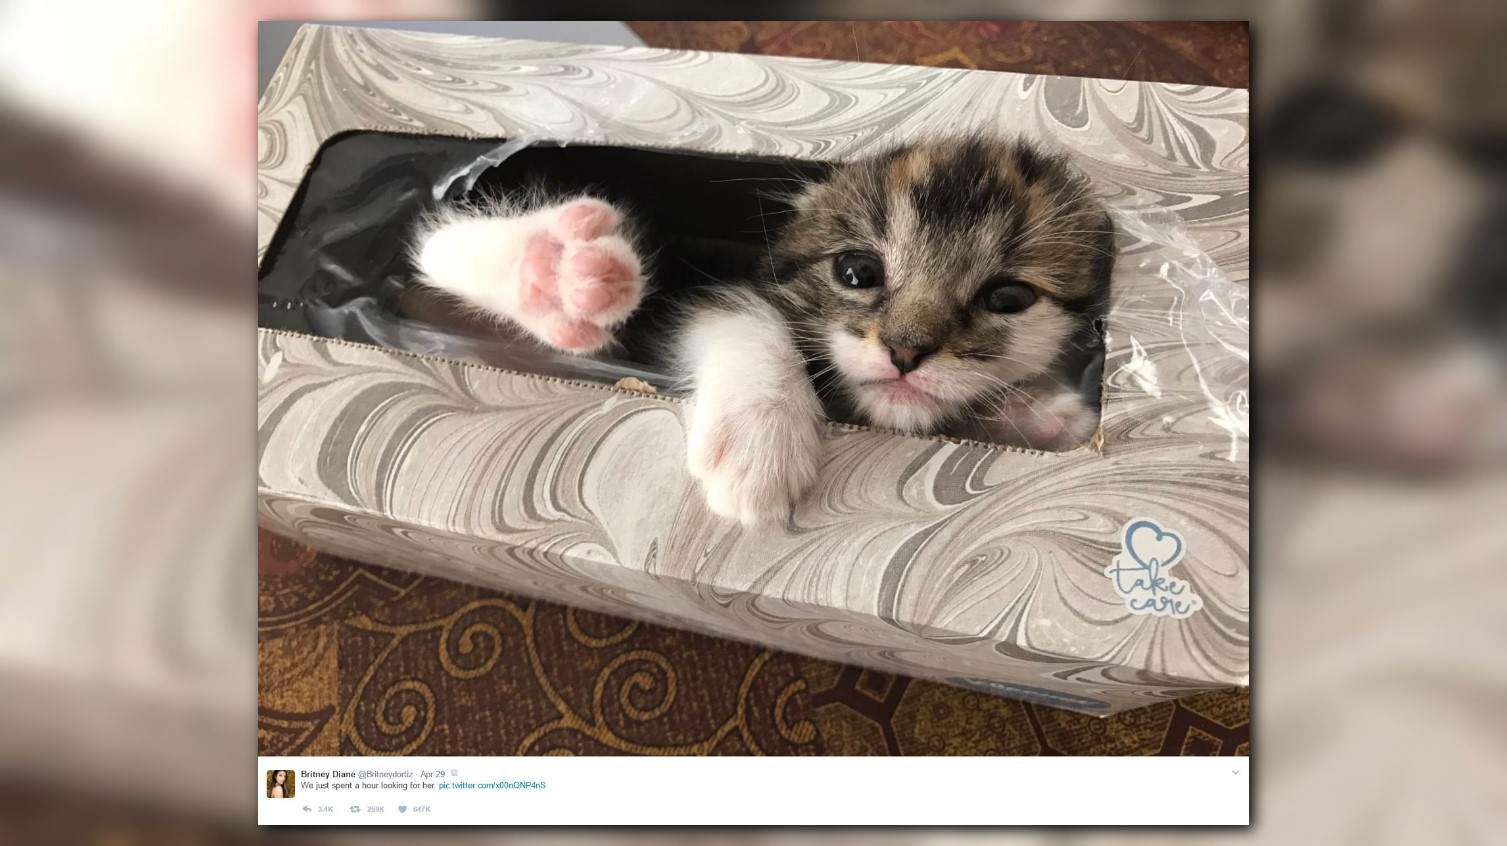 12news.com | Missing kitten found adorably tuckered out in tissue box